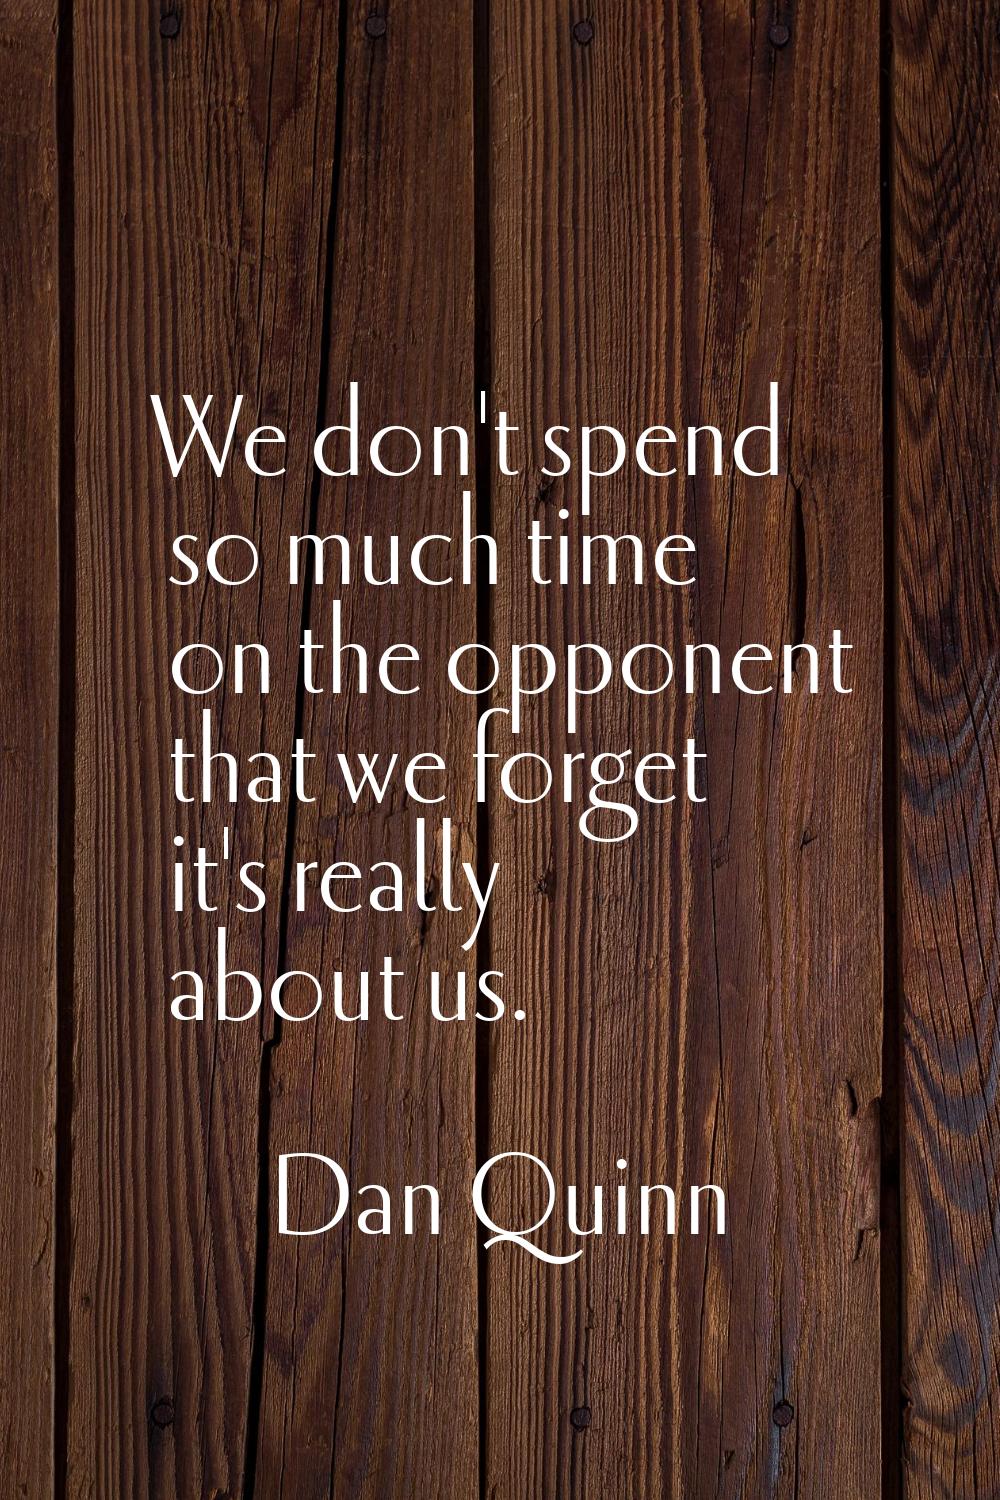 We don't spend so much time on the opponent that we forget it's really about us.